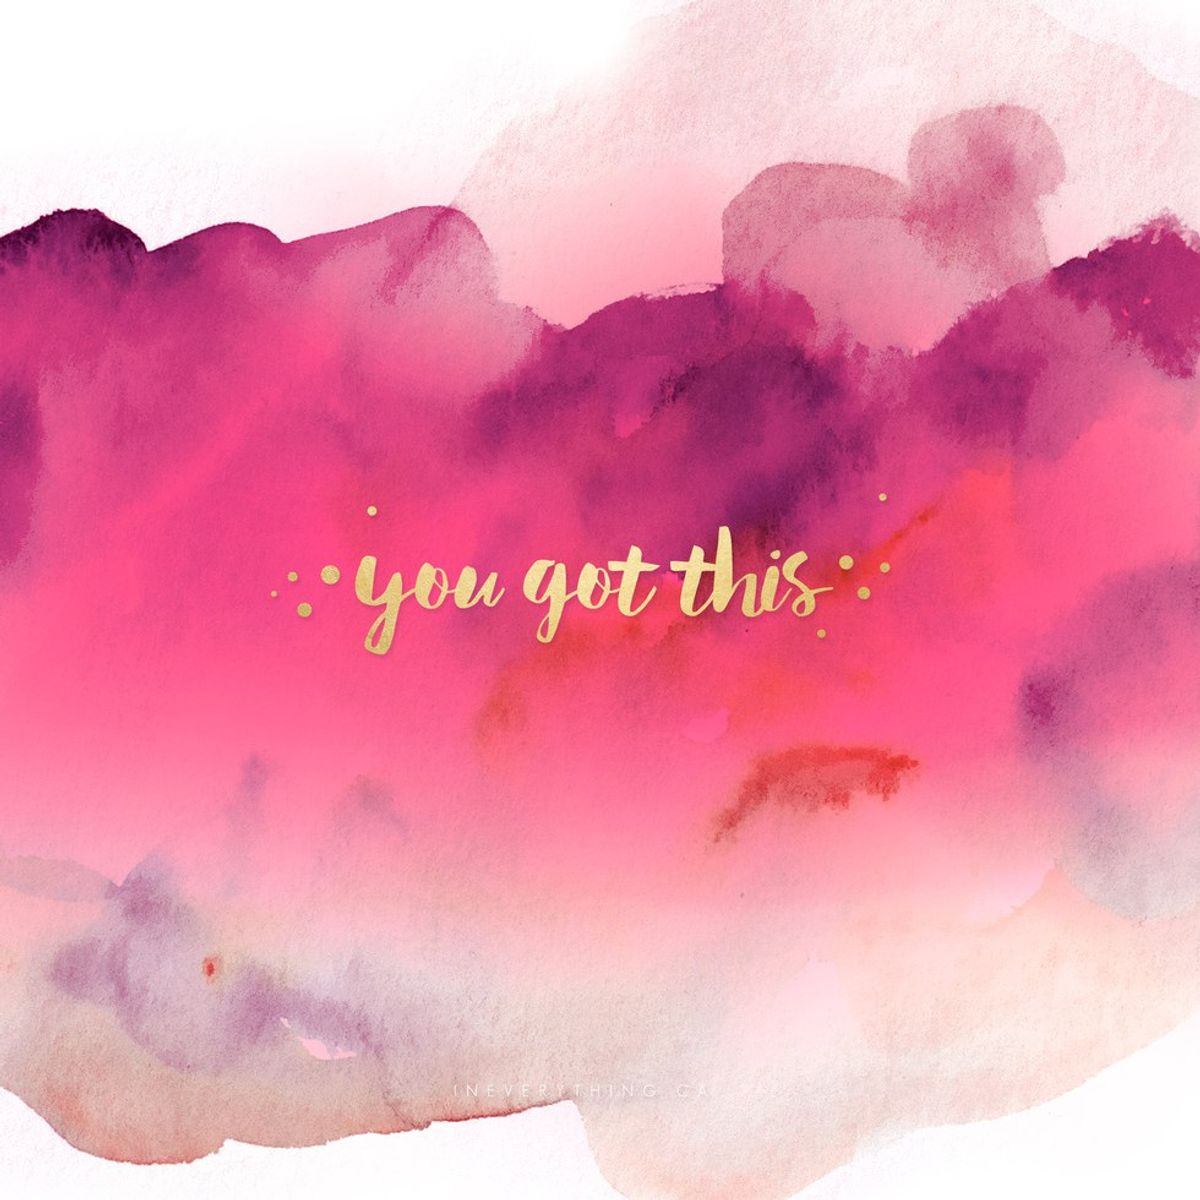 Don't Worry. Breathe. You've Got This!